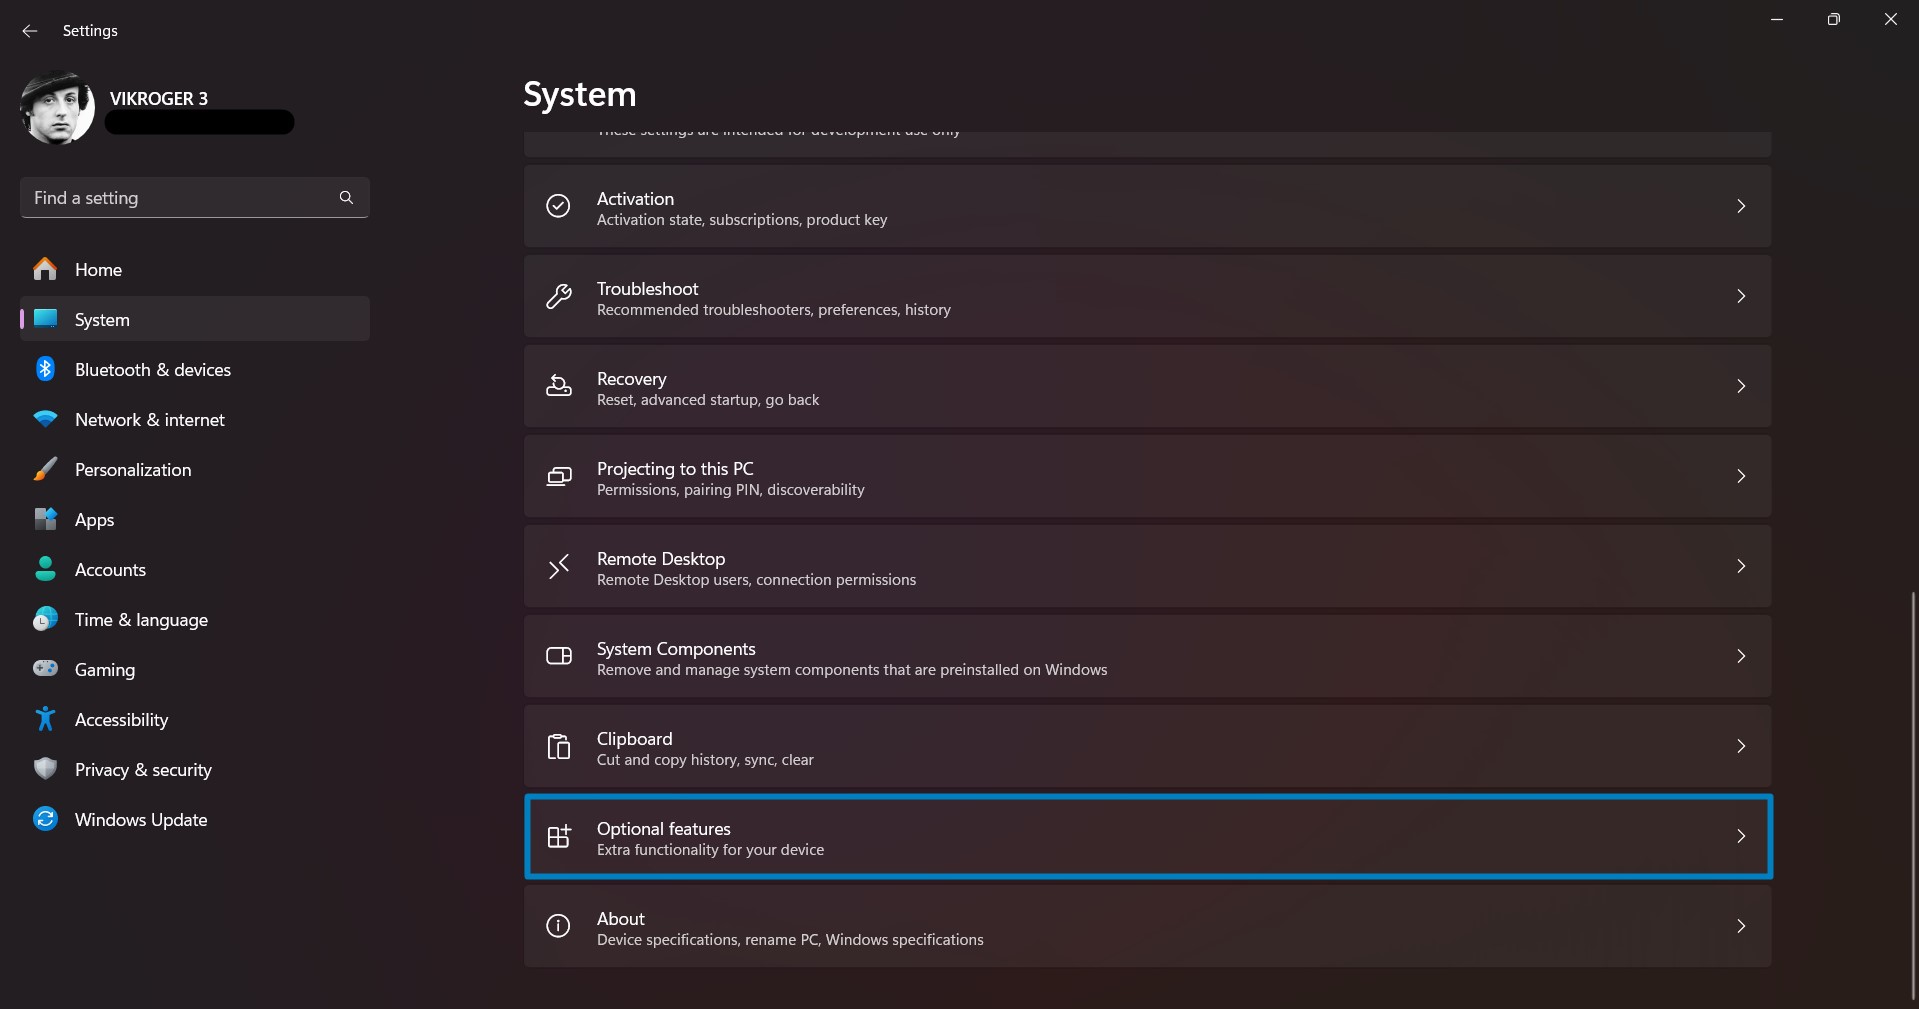 Optional Features in Windows Settings